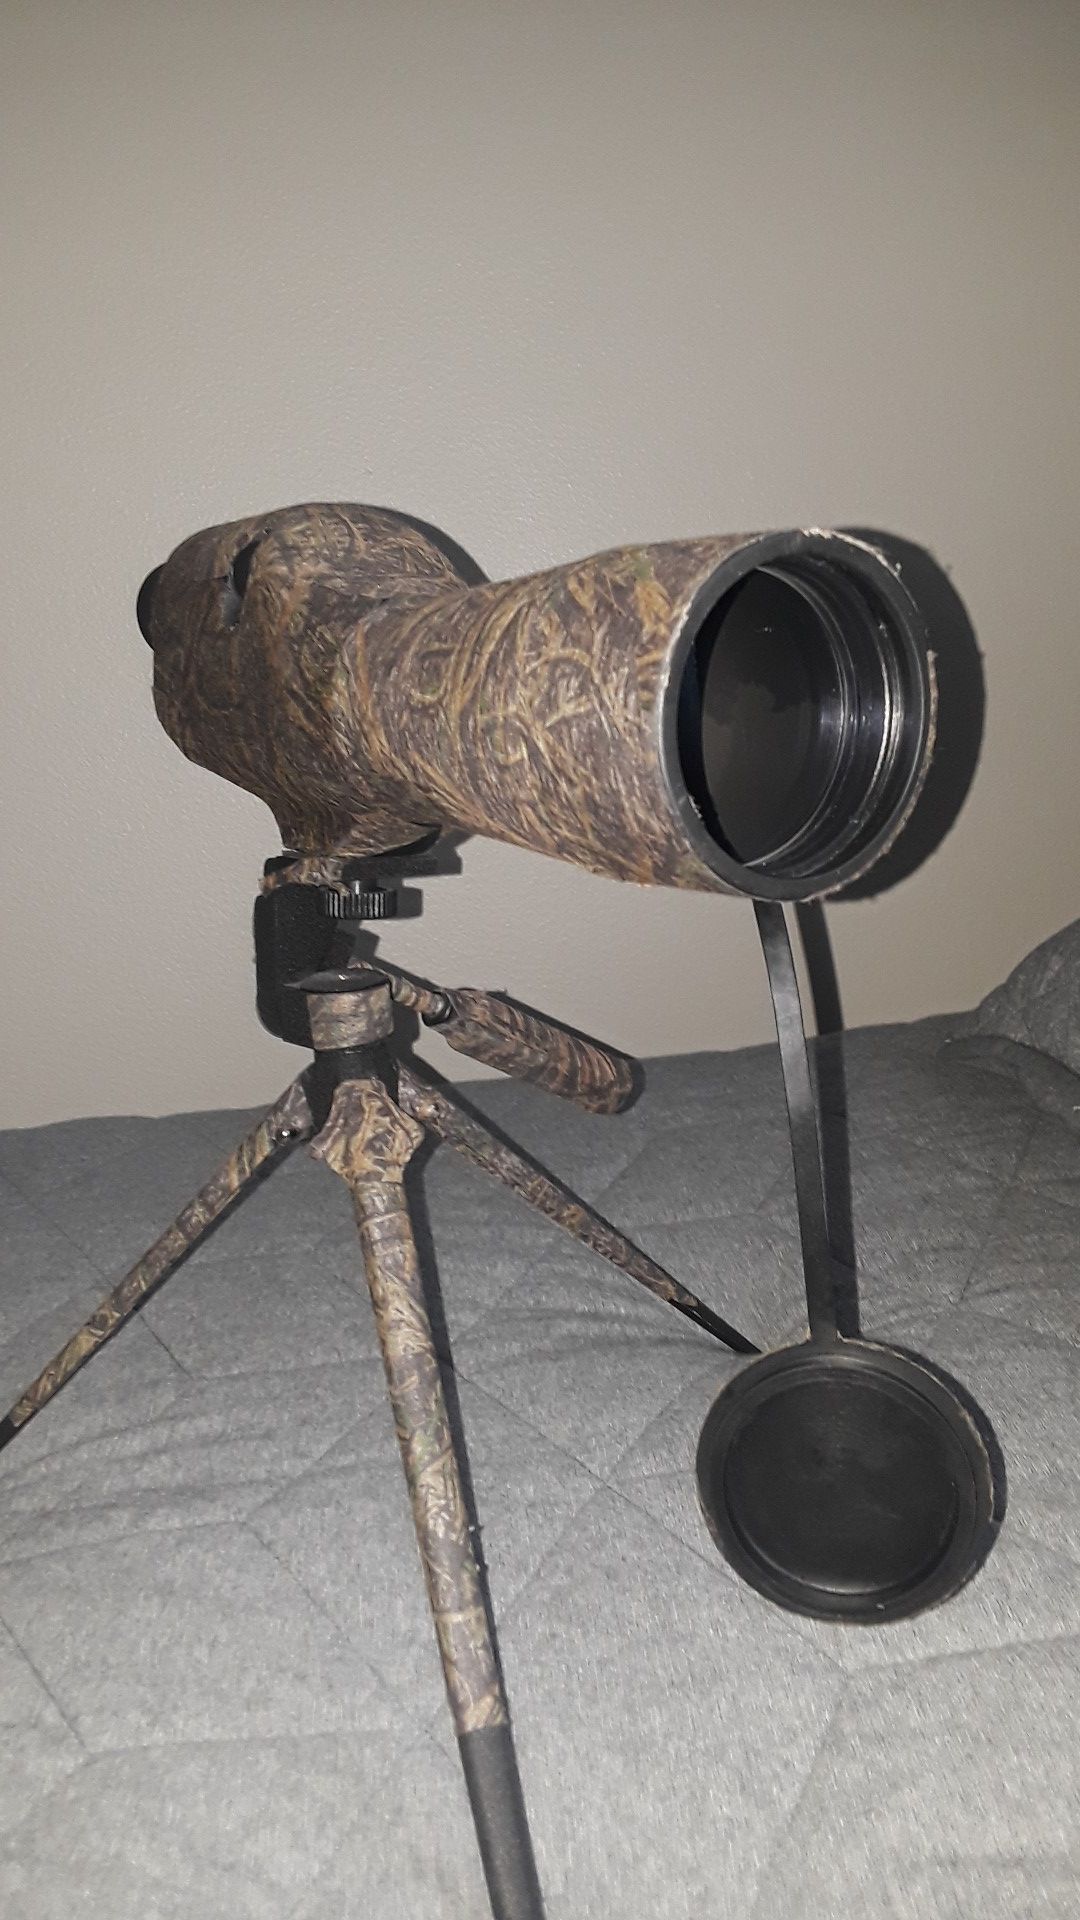 Hunting,Spotting Scope good condition well maintained with camo tape cover